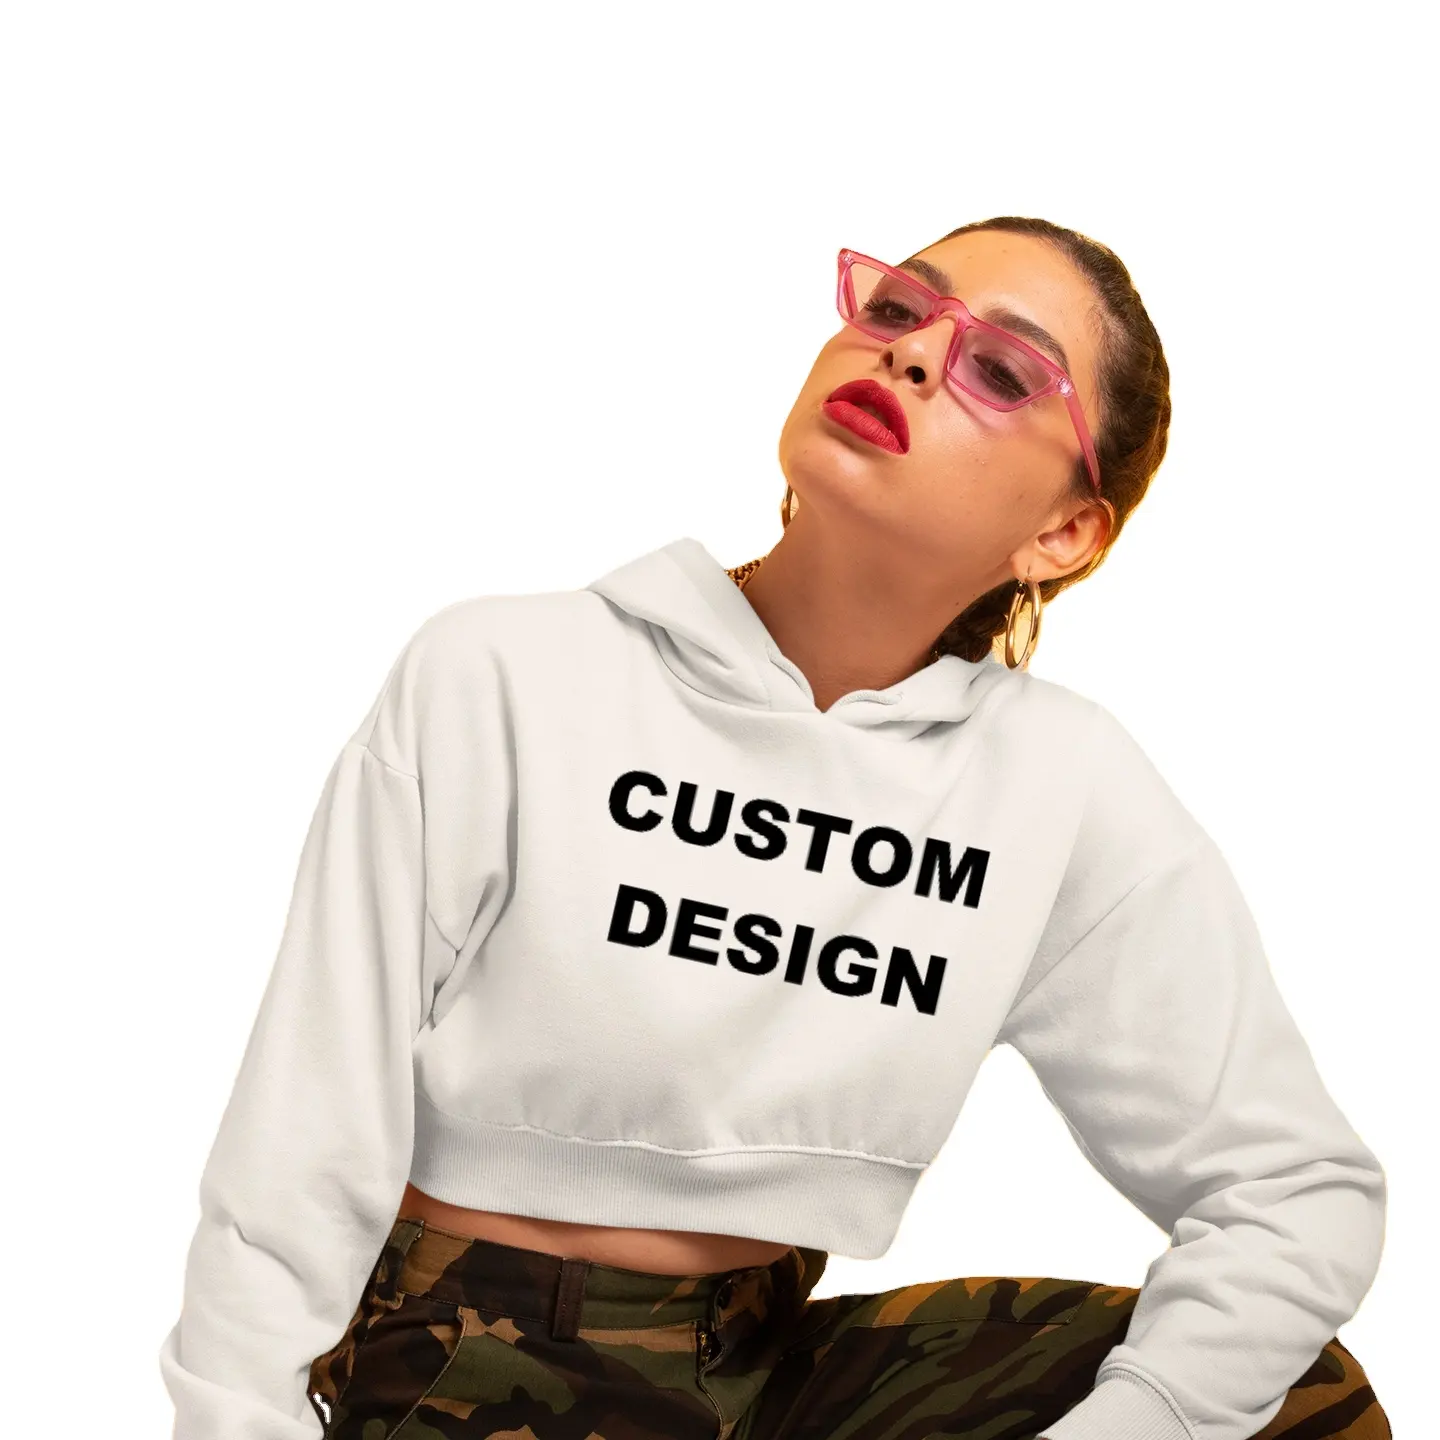 Fashionable %100 Cotton Cropped Hoodies For Women New Season Fashionable Design Made in Turkey